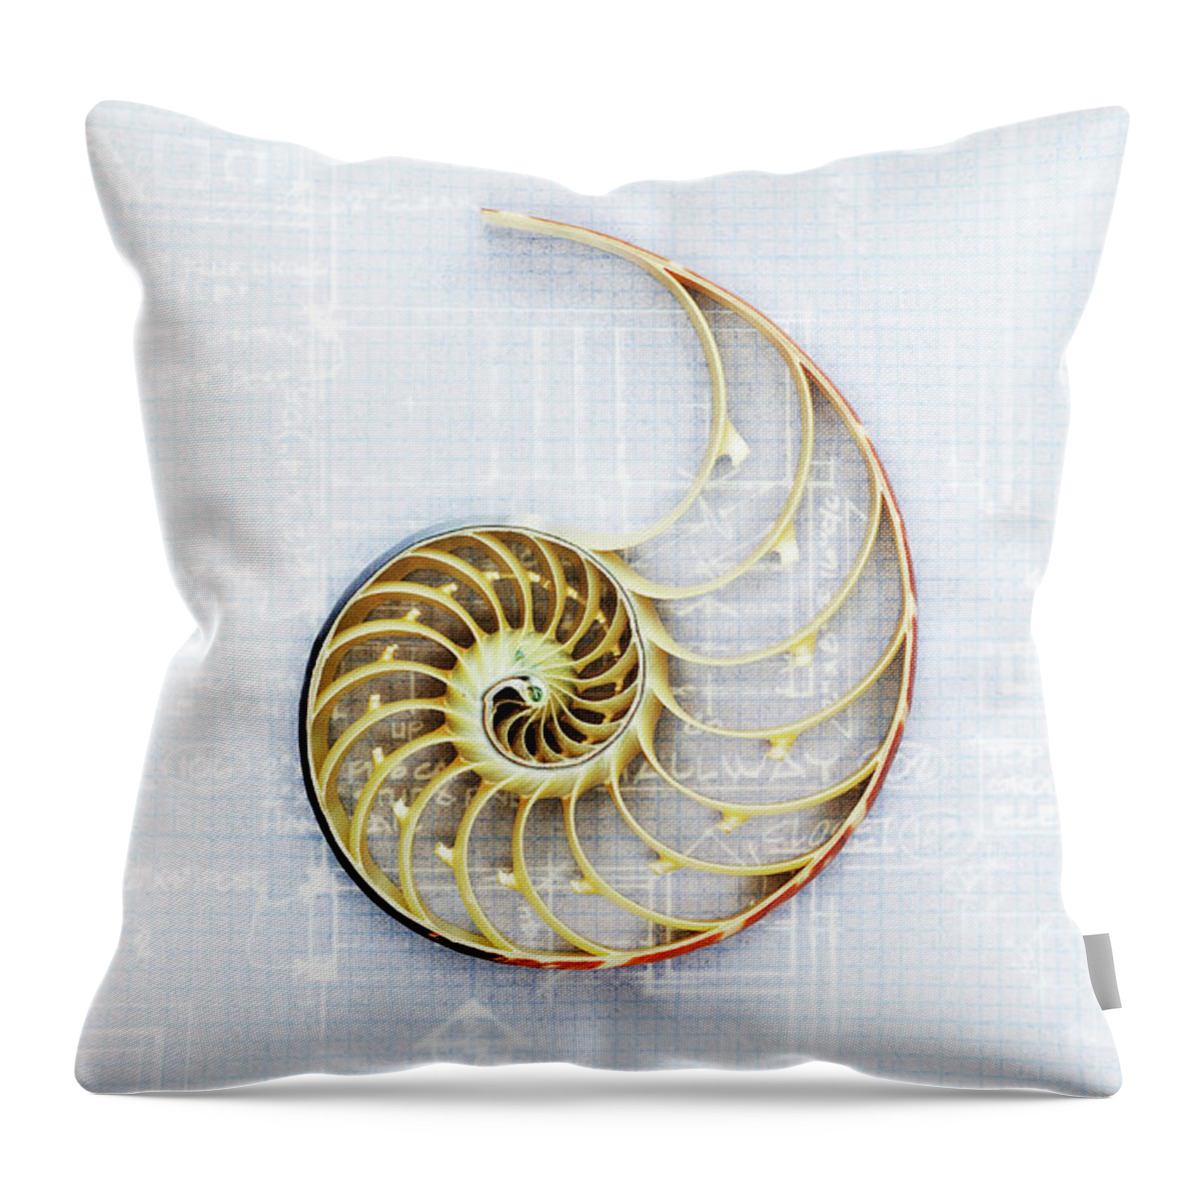 Curve Throw Pillow featuring the photograph Nautilus Shell On Blueprint, Close-up by David Muir